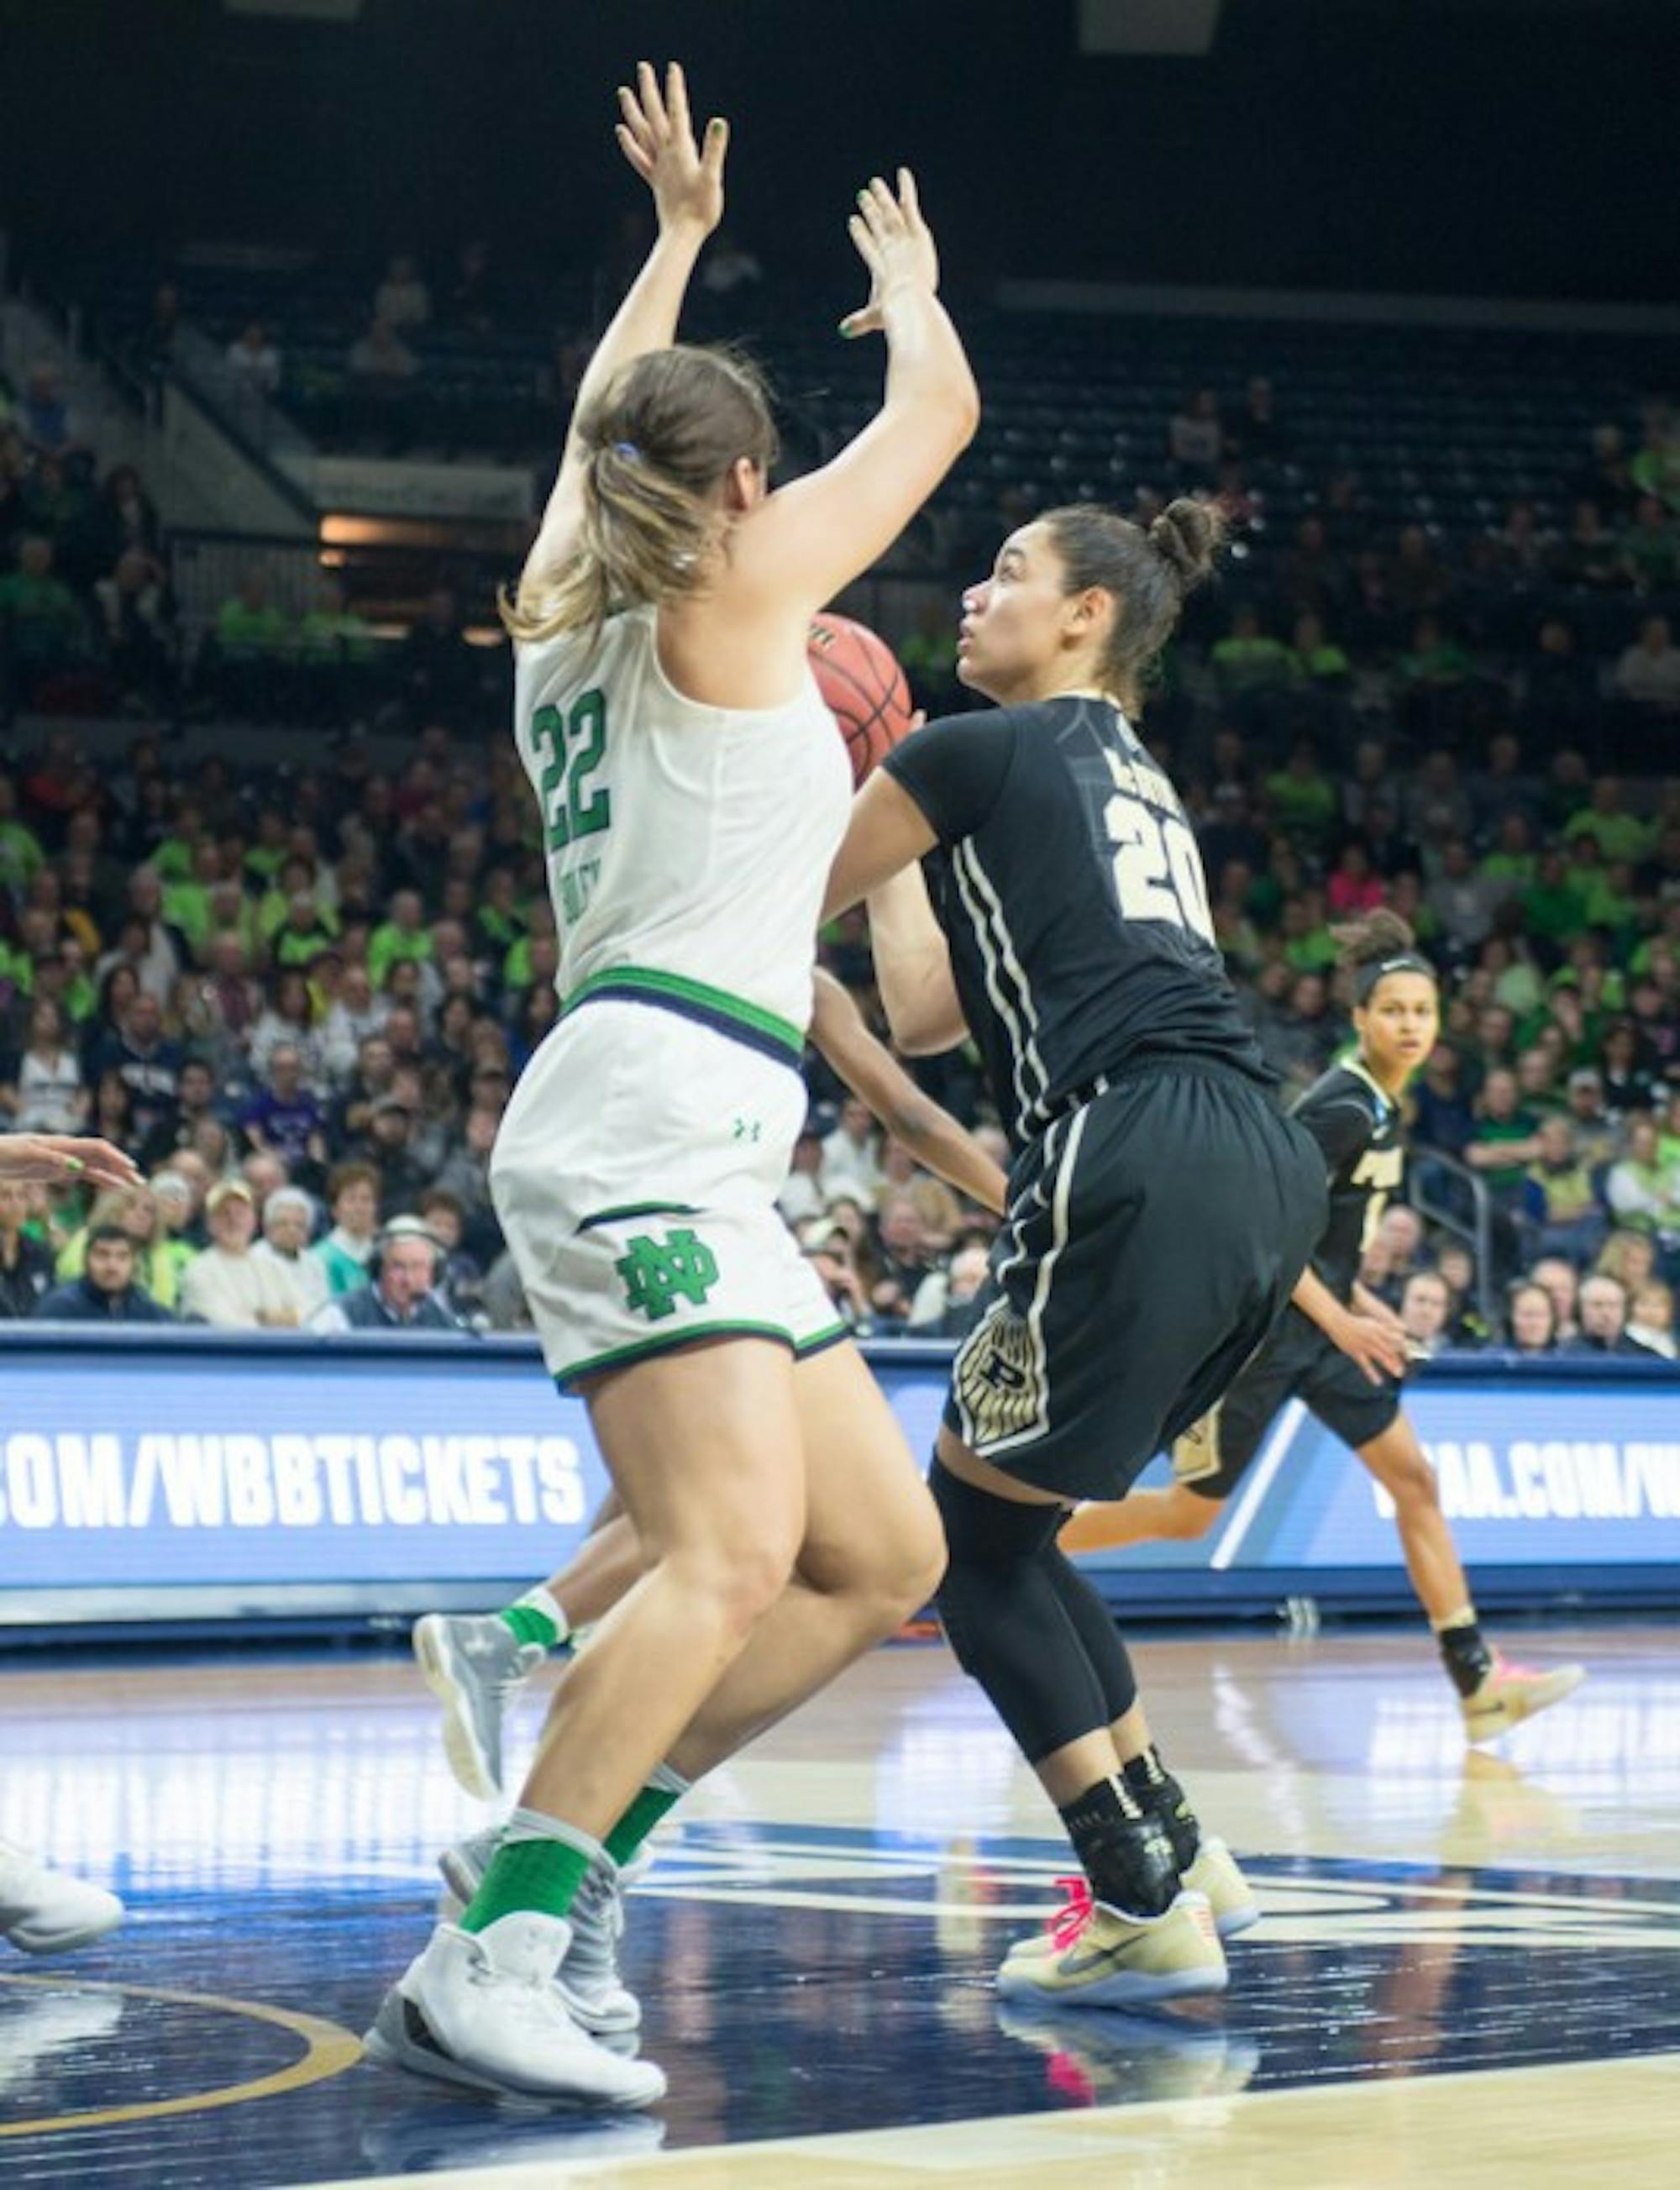 Former forward Erin Boley defends the paint against Boilermakers sophomore forward Dominique McBryde during Notre Dame’s 88-82 overtime win over Purdue on March 19 at Purcell Pavilion. Boley announced Tuesday that she would be transferring to Oregon for the remainder of her collegiate career.